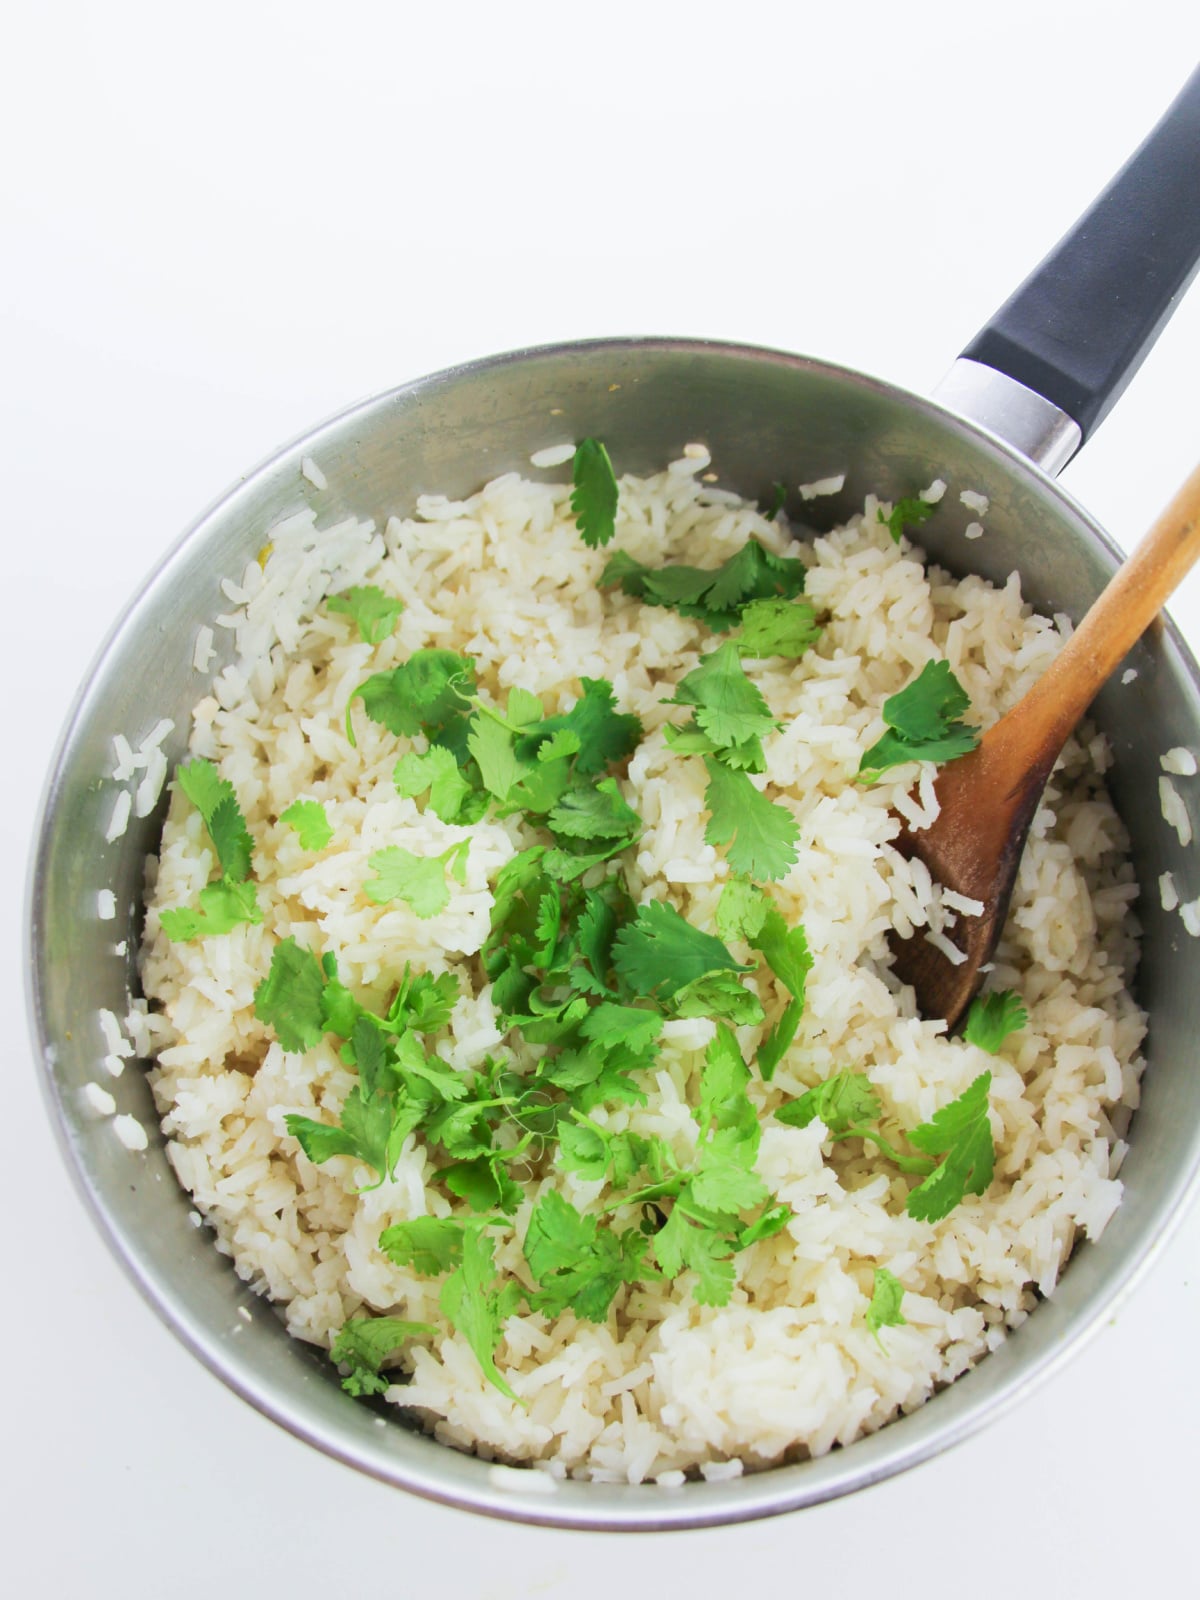 stir in lime juice and cilantro